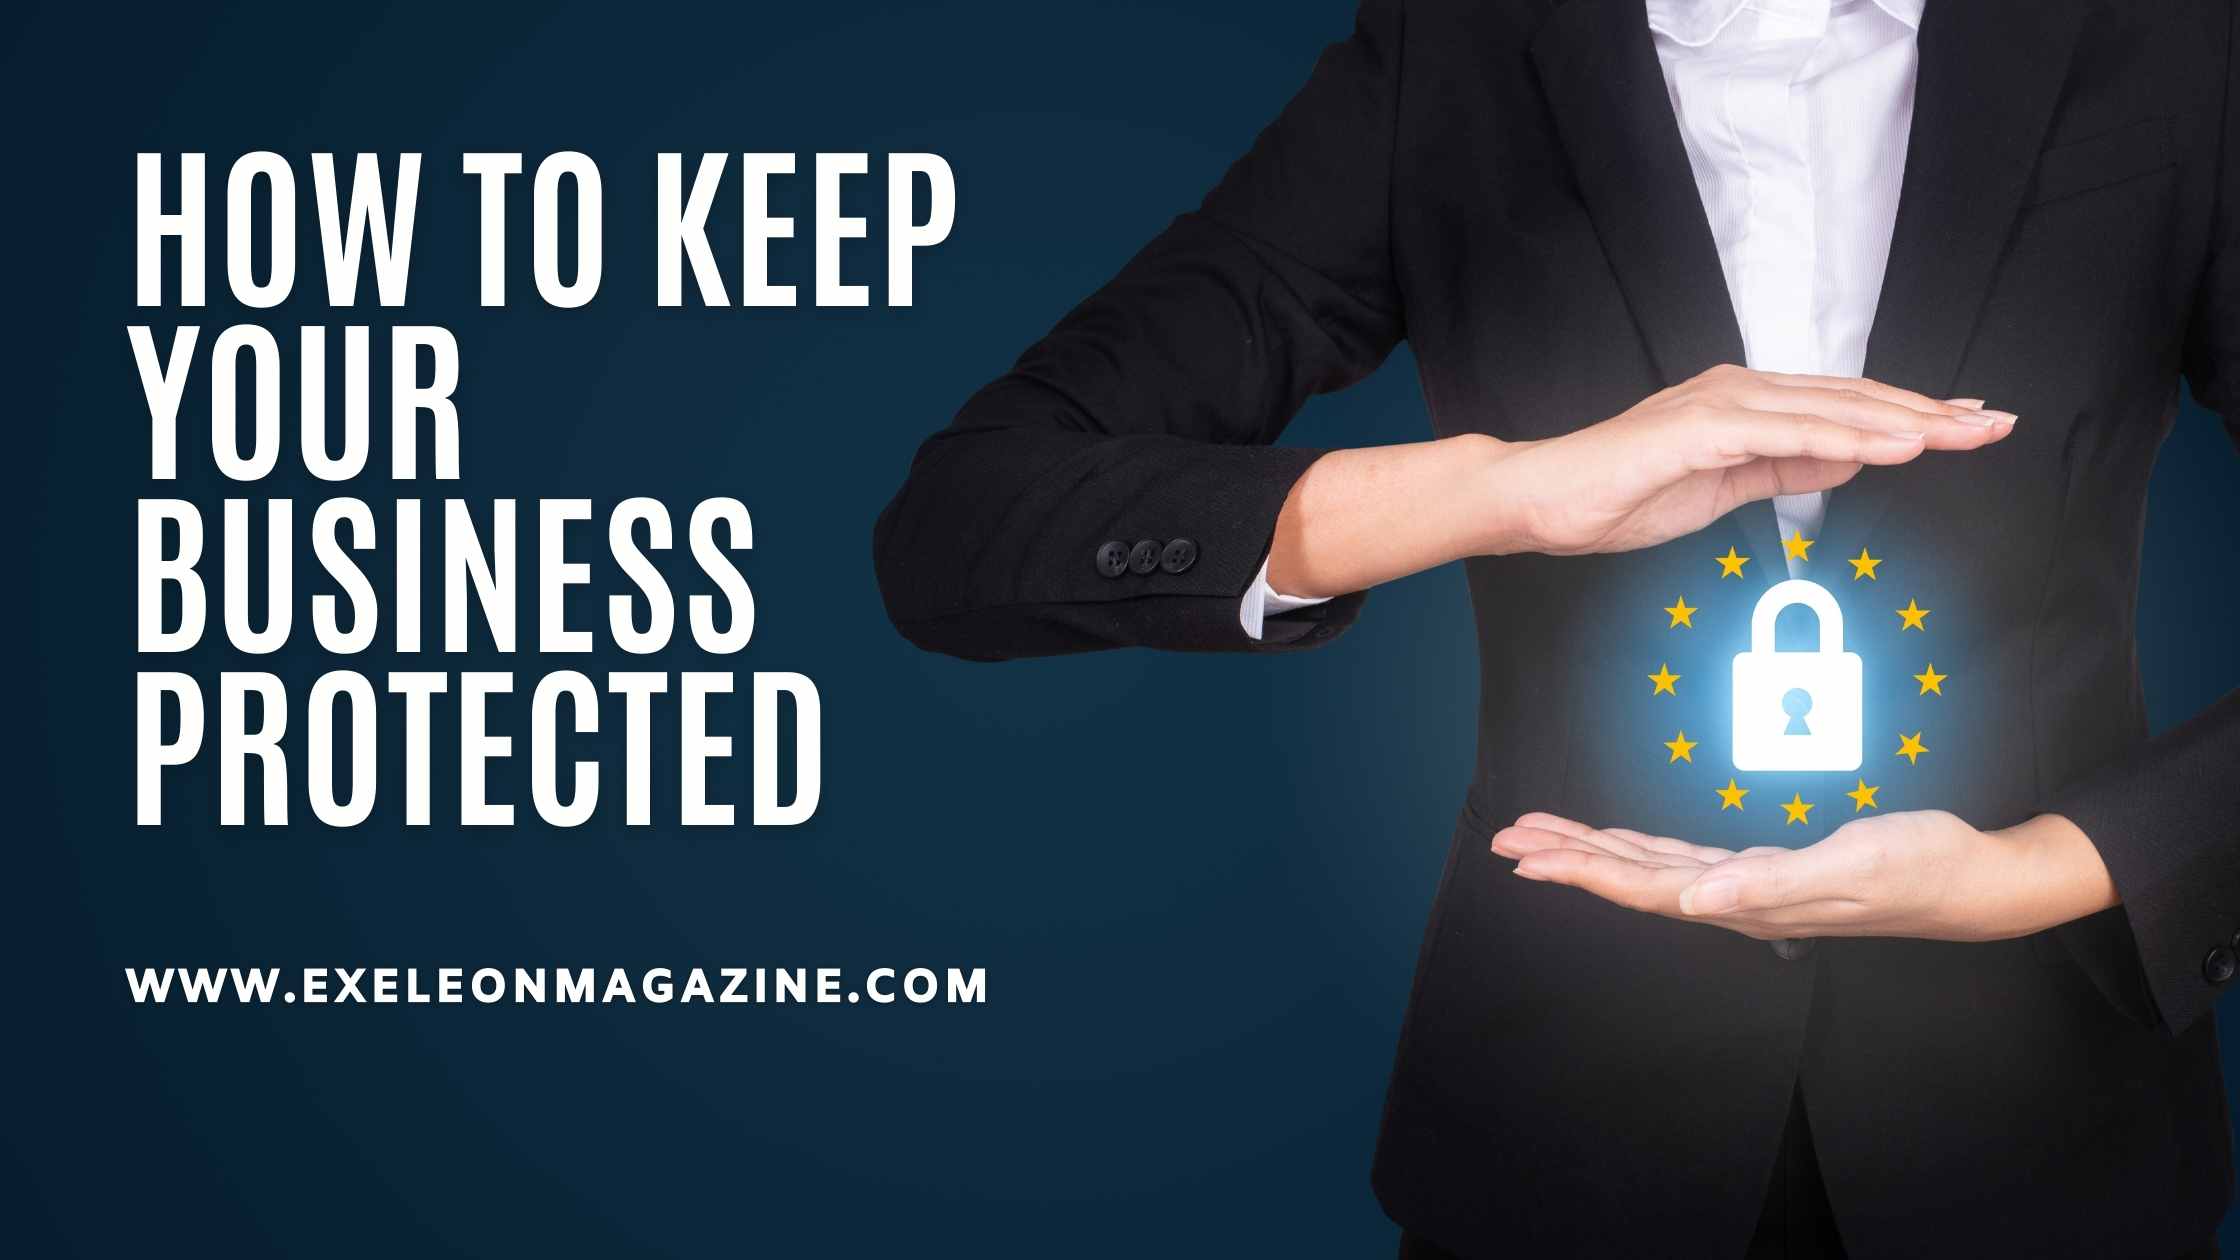 How to Keep your Business Protected